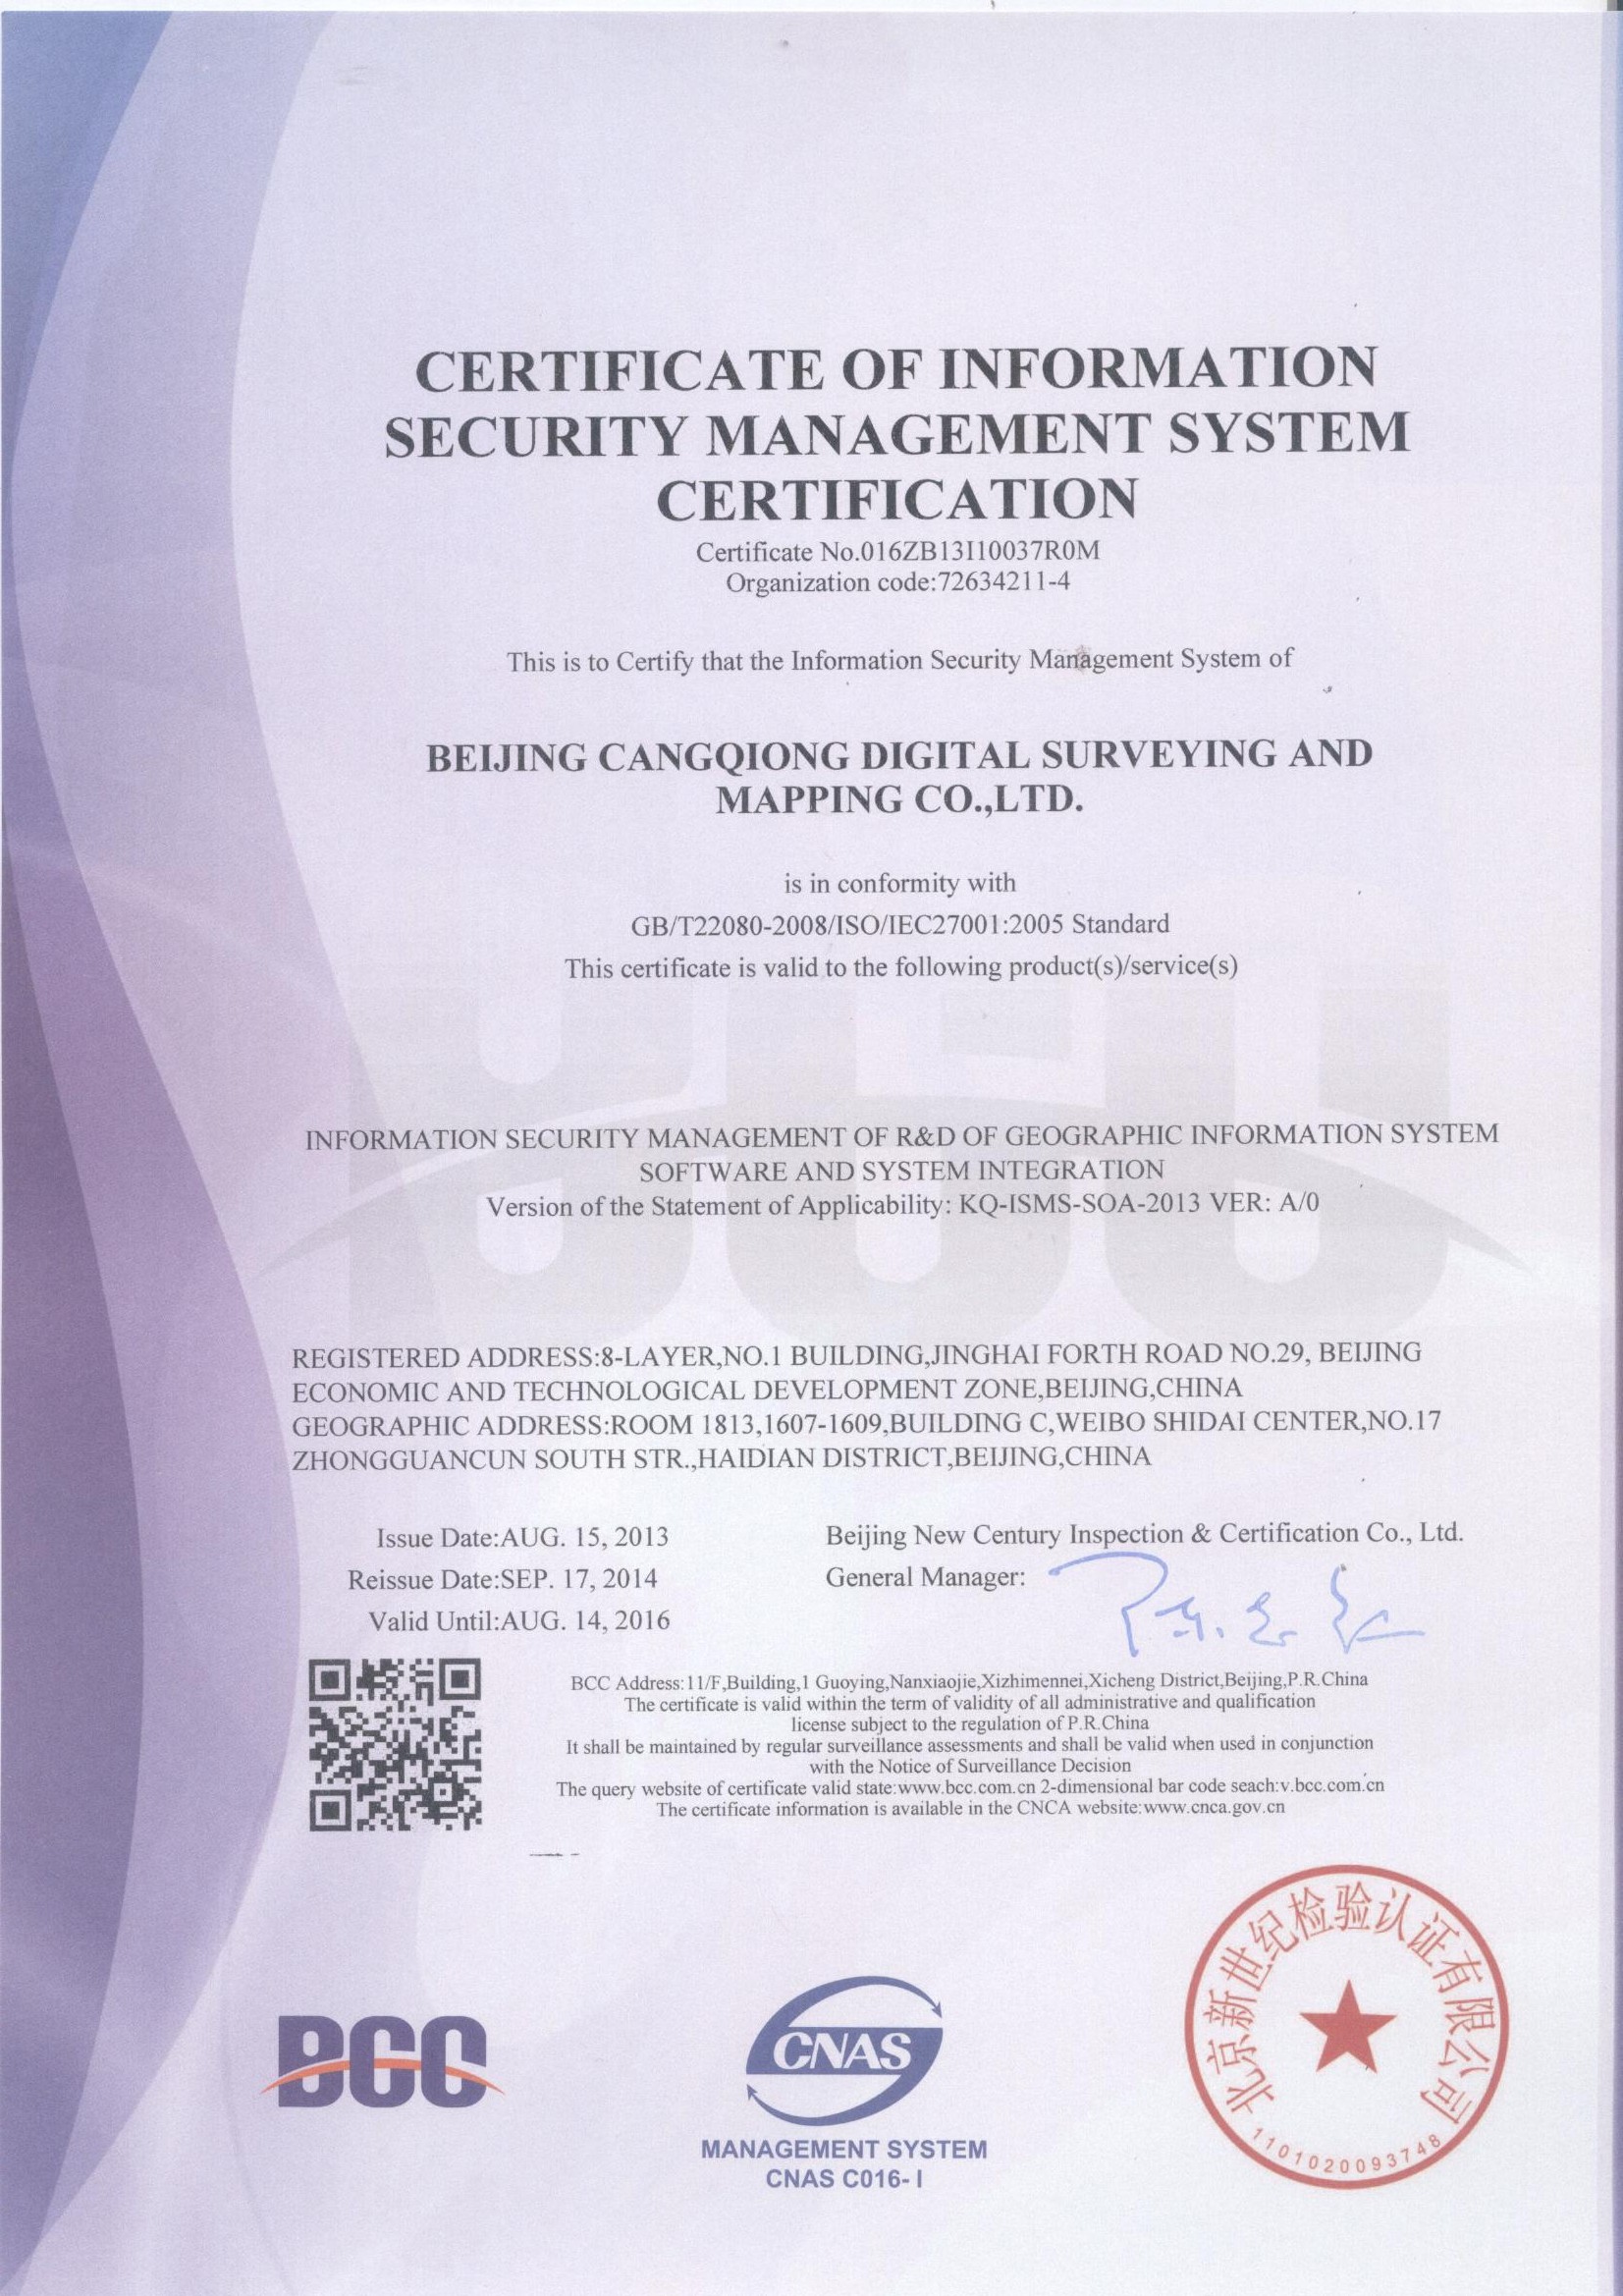 Certificate of Information Security Management